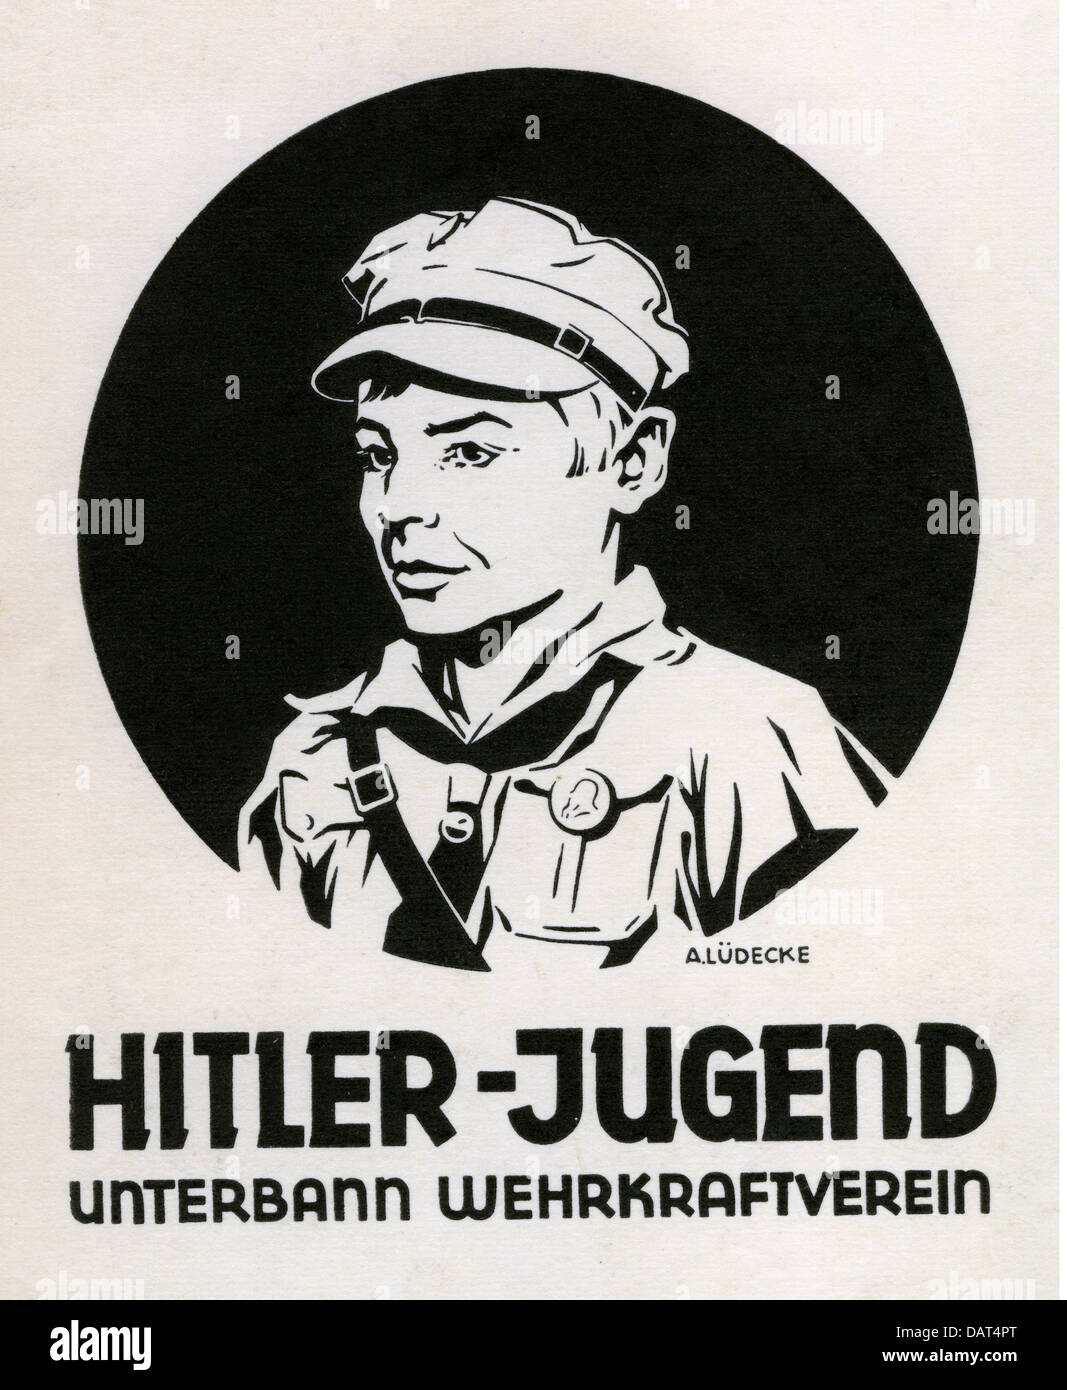 National Socialism, organisations, Hitler Youth (Hitlerjugend, HJ), postcard, drawing by A. Luedecke, 1936, Additional-Rights-Clearences-Not Available Stock Photo